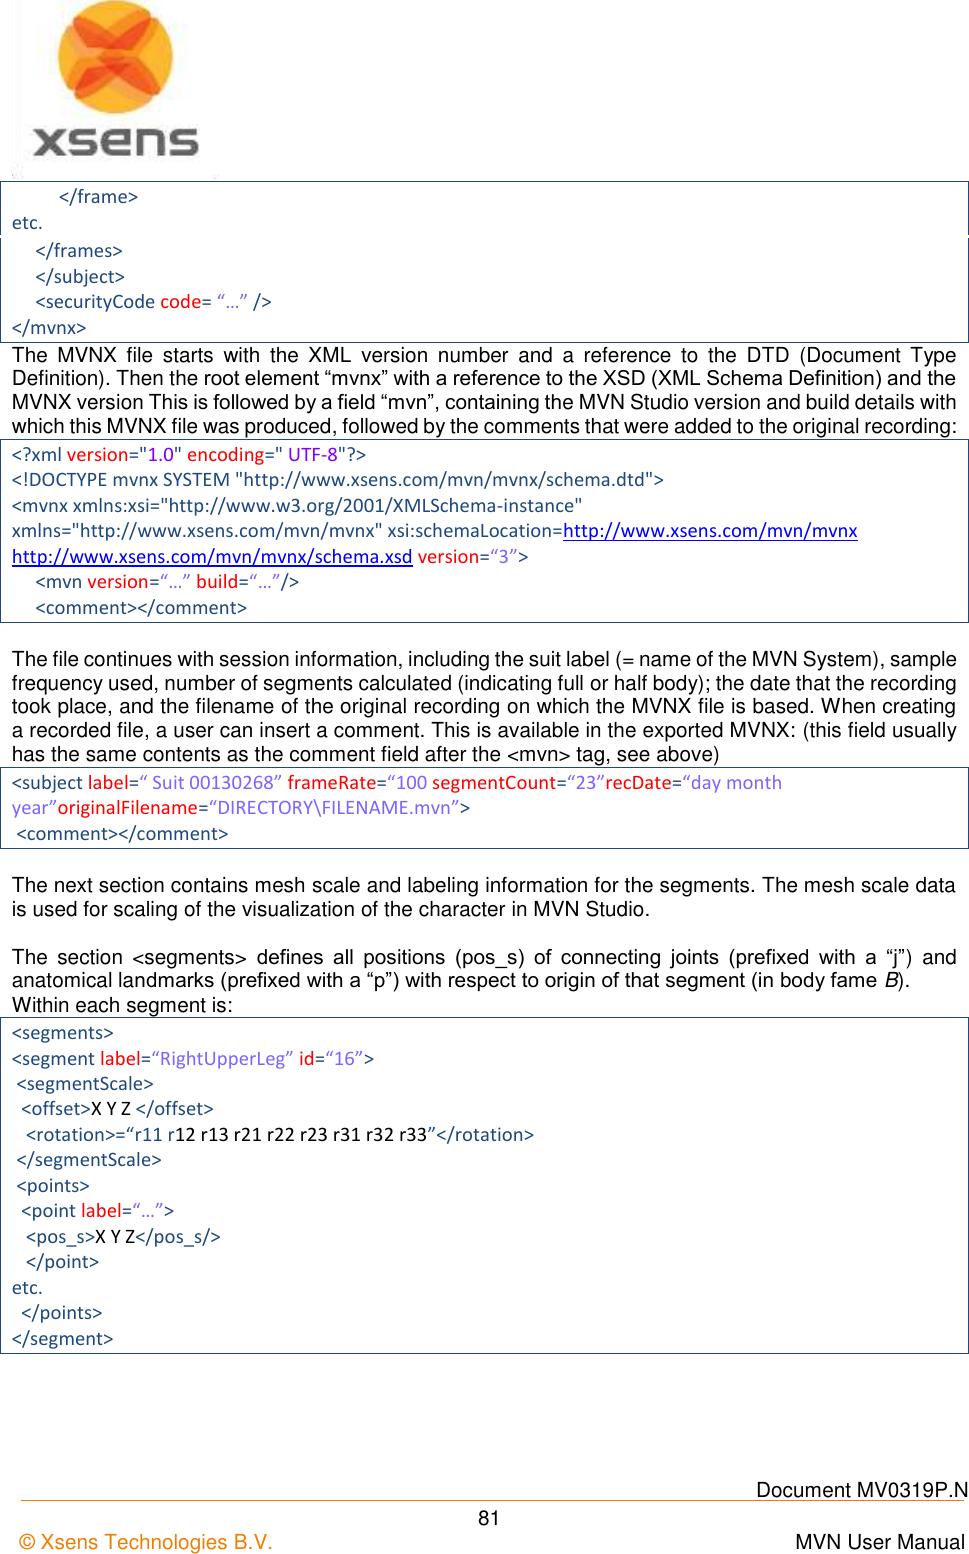    Document MV0319P.N © Xsens Technologies B.V.      MVN User Manual  81           &lt;/frame&gt; etc.      &lt;/frames&gt;      &lt;/subject&gt;      &lt;securityCode code= “…” /&gt; &lt;/mvnx&gt; The  MVNX  file  starts  with  the  XML  version  number  and  a  reference  to  the  DTD  (Document  Type Definition). Then the root element “mvnx” with a reference to the XSD (XML Schema Definition) and the MVNX version This is followed by a field “mvn”, containing the MVN Studio version and build details with which this MVNX file was produced, followed by the comments that were added to the original recording: &lt;?xml version=&quot;1.0&quot; encoding=&quot; UTF-8&quot;?&gt; &lt;!DOCTYPE mvnx SYSTEM &quot;http://www.xsens.com/mvn/mvnx/schema.dtd&quot;&gt; &lt;mvnx xmlns:xsi=&quot;http://www.w3.org/2001/XMLSchema-instance&quot; xmlns=&quot;http://www.xsens.com/mvn/mvnx&quot; xsi:schemaLocation=http://www.xsens.com/mvn/mvnx http://www.xsens.com/mvn/mvnx/schema.xsd version=“3”&gt;      &lt;mvn version=“…” build=“…”/&gt;      &lt;comment&gt;&lt;/comment&gt;  The file continues with session information, including the suit label (= name of the MVN System), sample frequency used, number of segments calculated (indicating full or half body); the date that the recording took place, and the filename of the original recording on which the MVNX file is based. When creating a recorded file, a user can insert a comment. This is available in the exported MVNX: (this field usually has the same contents as the comment field after the &lt;mvn&gt; tag, see above) &lt;subject label=“ Suit 00130268” frameRate=“100 segmentCount=“23”recDate=“day month year”originalFilename=“DIRECTORY\FILENAME.mvn”&gt;  &lt;comment&gt;&lt;/comment&gt;  The next section contains mesh scale and labeling information for the segments. The mesh scale data is used for scaling of the visualization of the character in MVN Studio.  The  section  &lt;segments&gt;  defines  all  positions  (pos_s)  of  connecting  joints  (prefixed  with  a  “j”)  and anatomical landmarks (prefixed with a “p”) with respect to origin of that segment (in body fame B). Within each segment is: &lt;segments&gt; &lt;segment label=“RightUpperLeg” id=“16”&gt;  &lt;segmentScale&gt;   &lt;offset&gt;X Y Z &lt;/offset&gt;    &lt;rotation&gt;=“r11 r12 r13 r21 r22 r23 r31 r32 r33”&lt;/rotation&gt;  &lt;/segmentScale&gt;  &lt;points&gt;   &lt;point label=“…”&gt;    &lt;pos_s&gt;X Y Z&lt;/pos_s/&gt;    &lt;/point&gt; etc.   &lt;/points&gt; &lt;/segment&gt; 